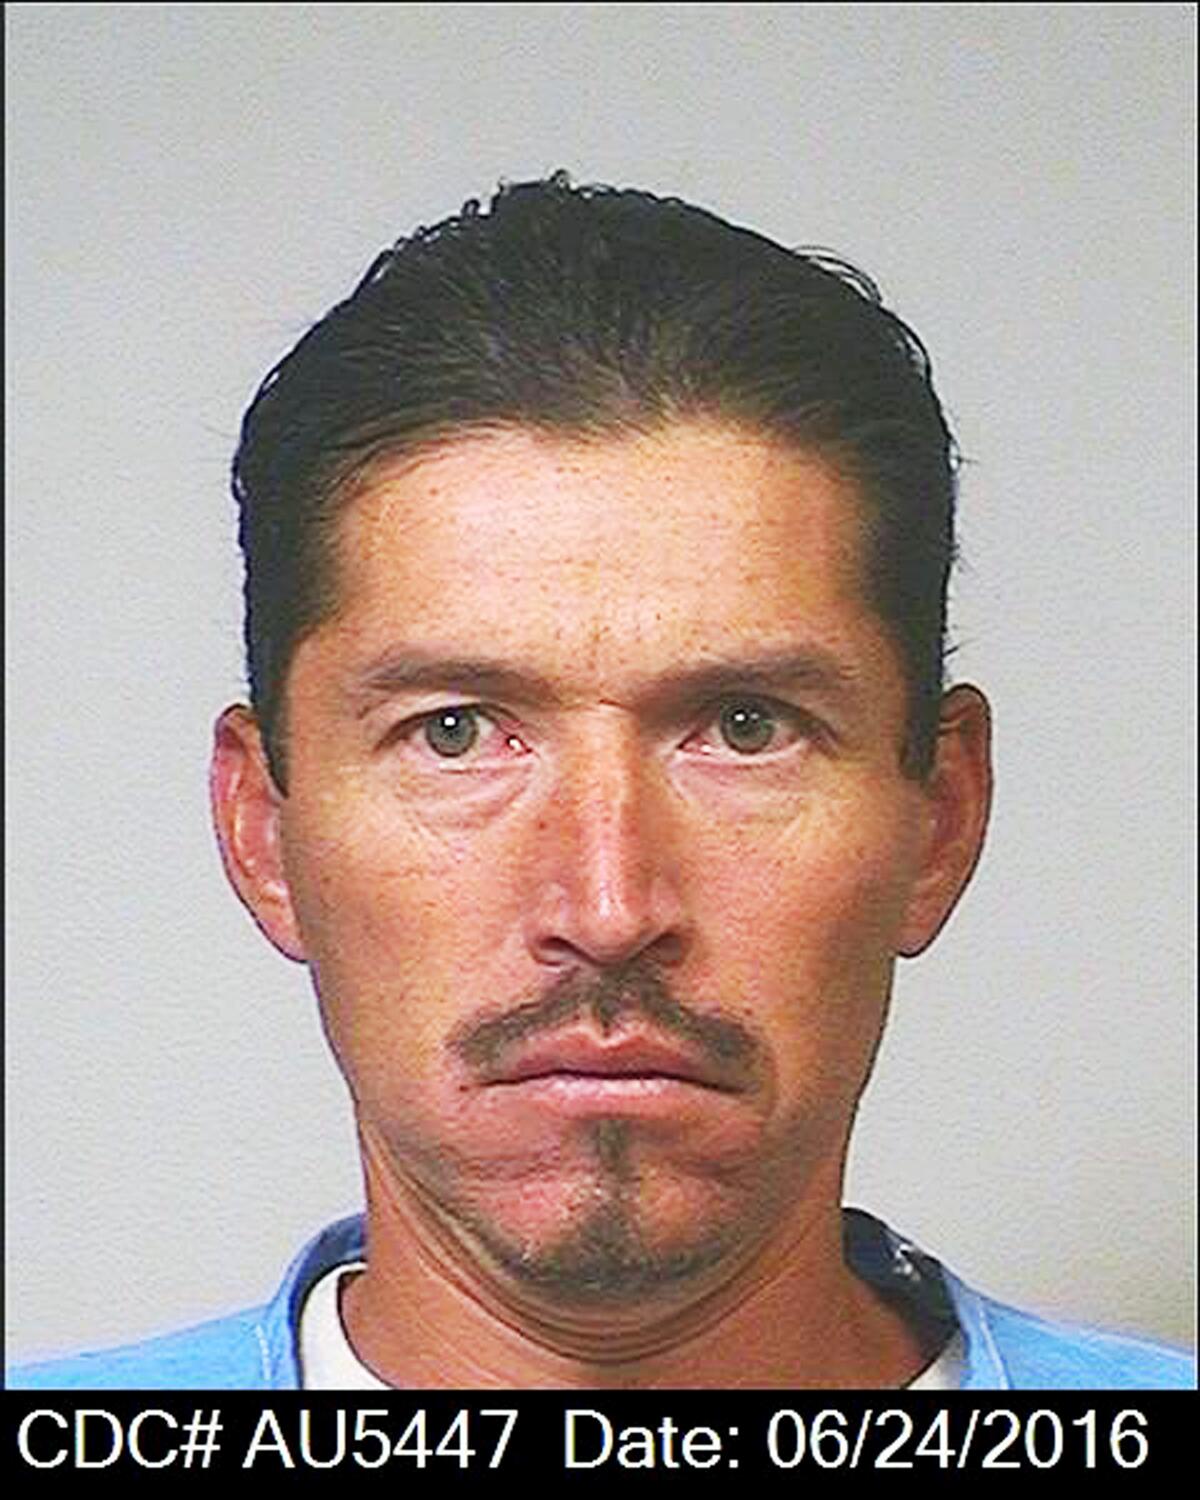 A prison booking mugshot of a man with facial hair